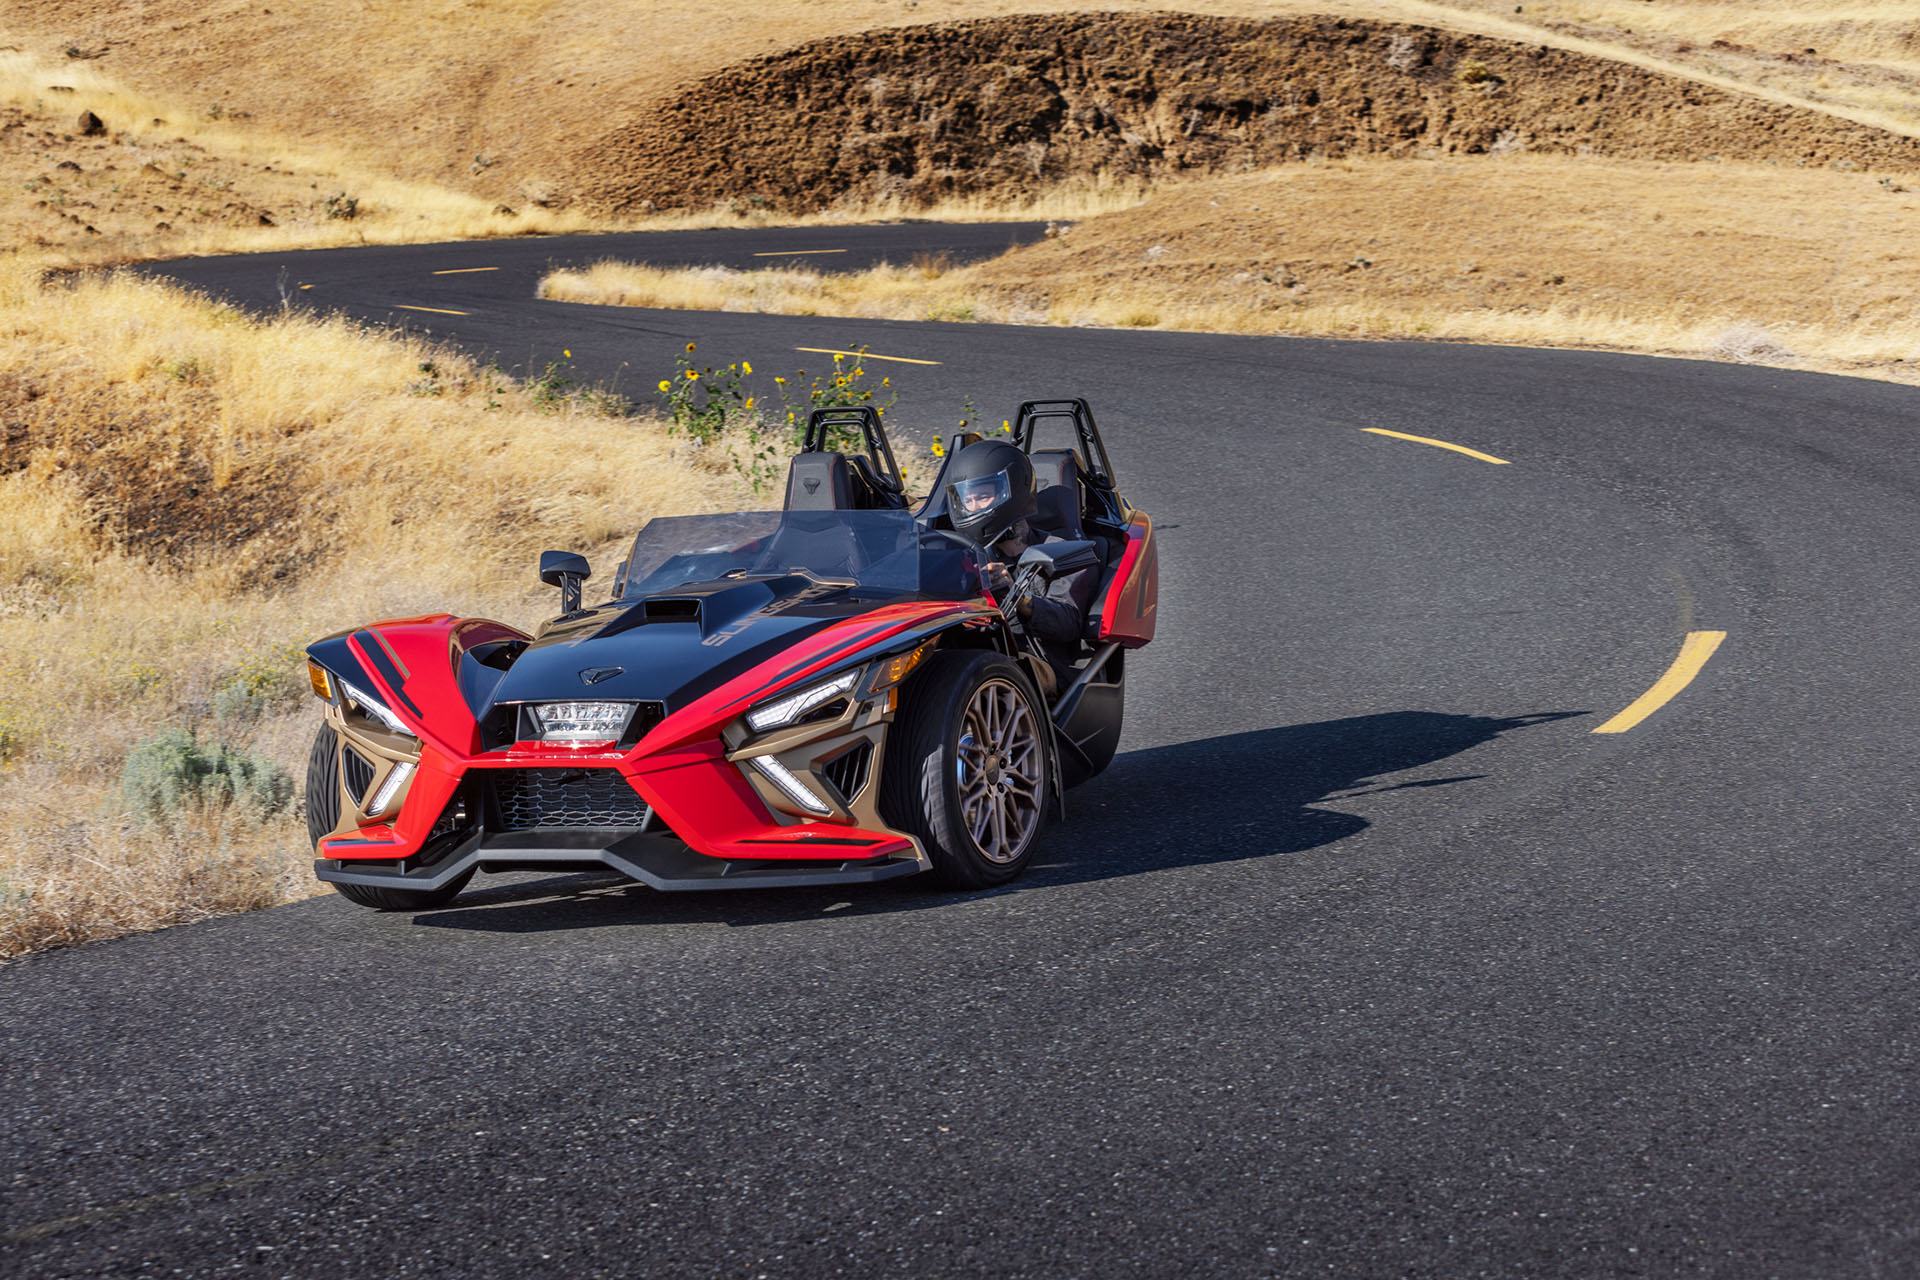 2022 Slingshot Signature Limited Edition in Altoona, Wisconsin - Photo 5